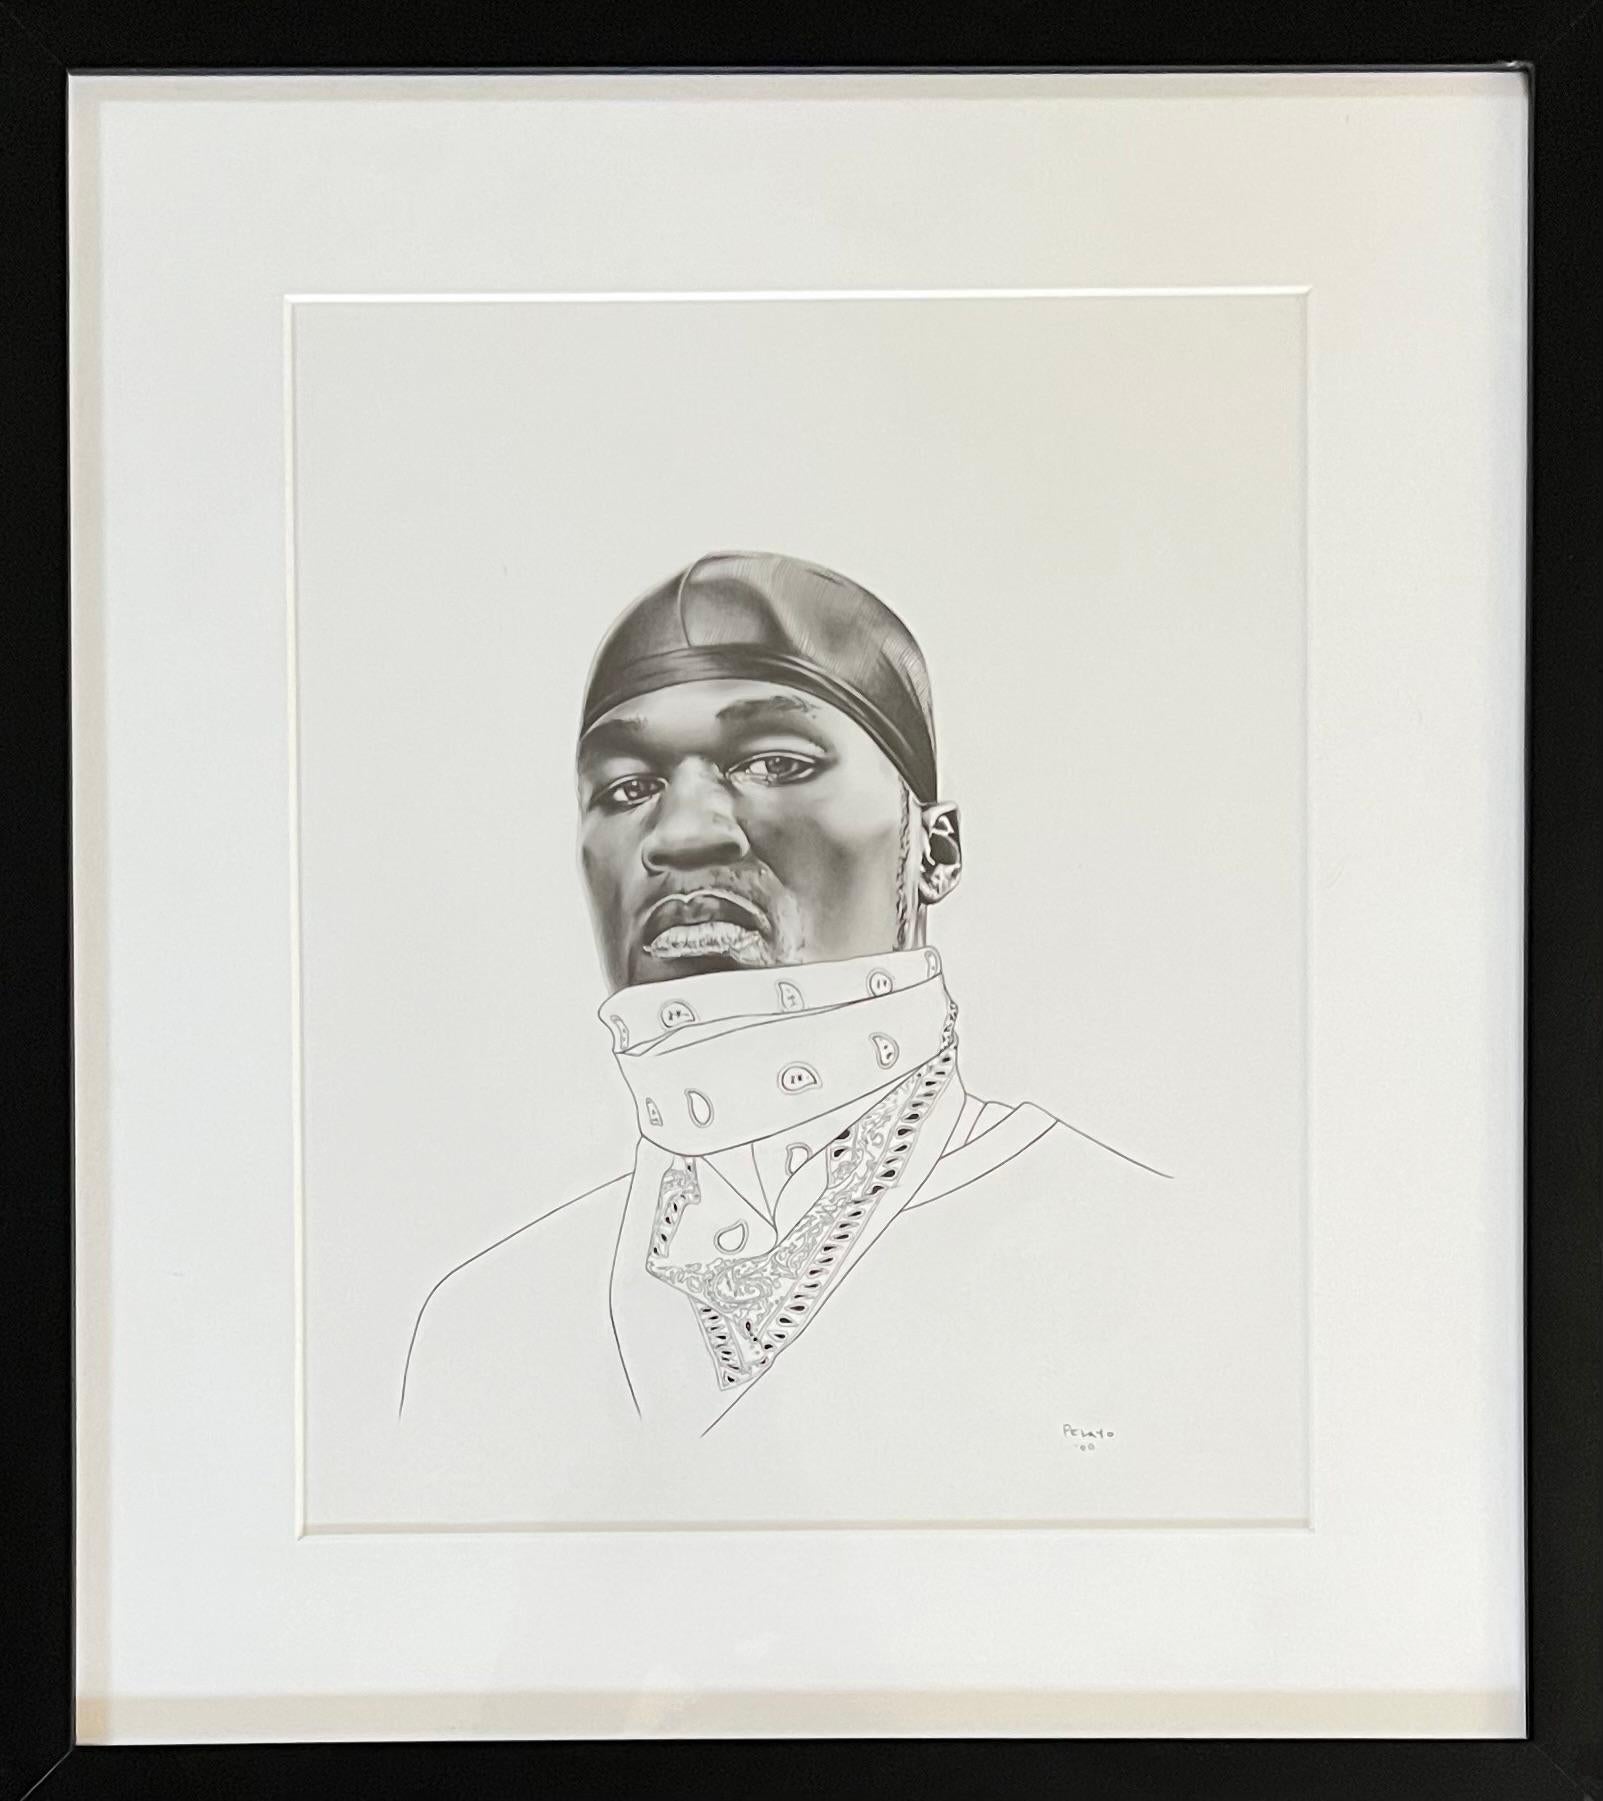 "50" (FRAMED) Pencil Drawing 17" x 15" inch by Antonio Pelayo

Medium: Pencil on Paper

Artist Antonio Pelayo, born in Glendale, California, and yet raised for most of his childhood in the Mexican countryside, has never had his own country. Moving